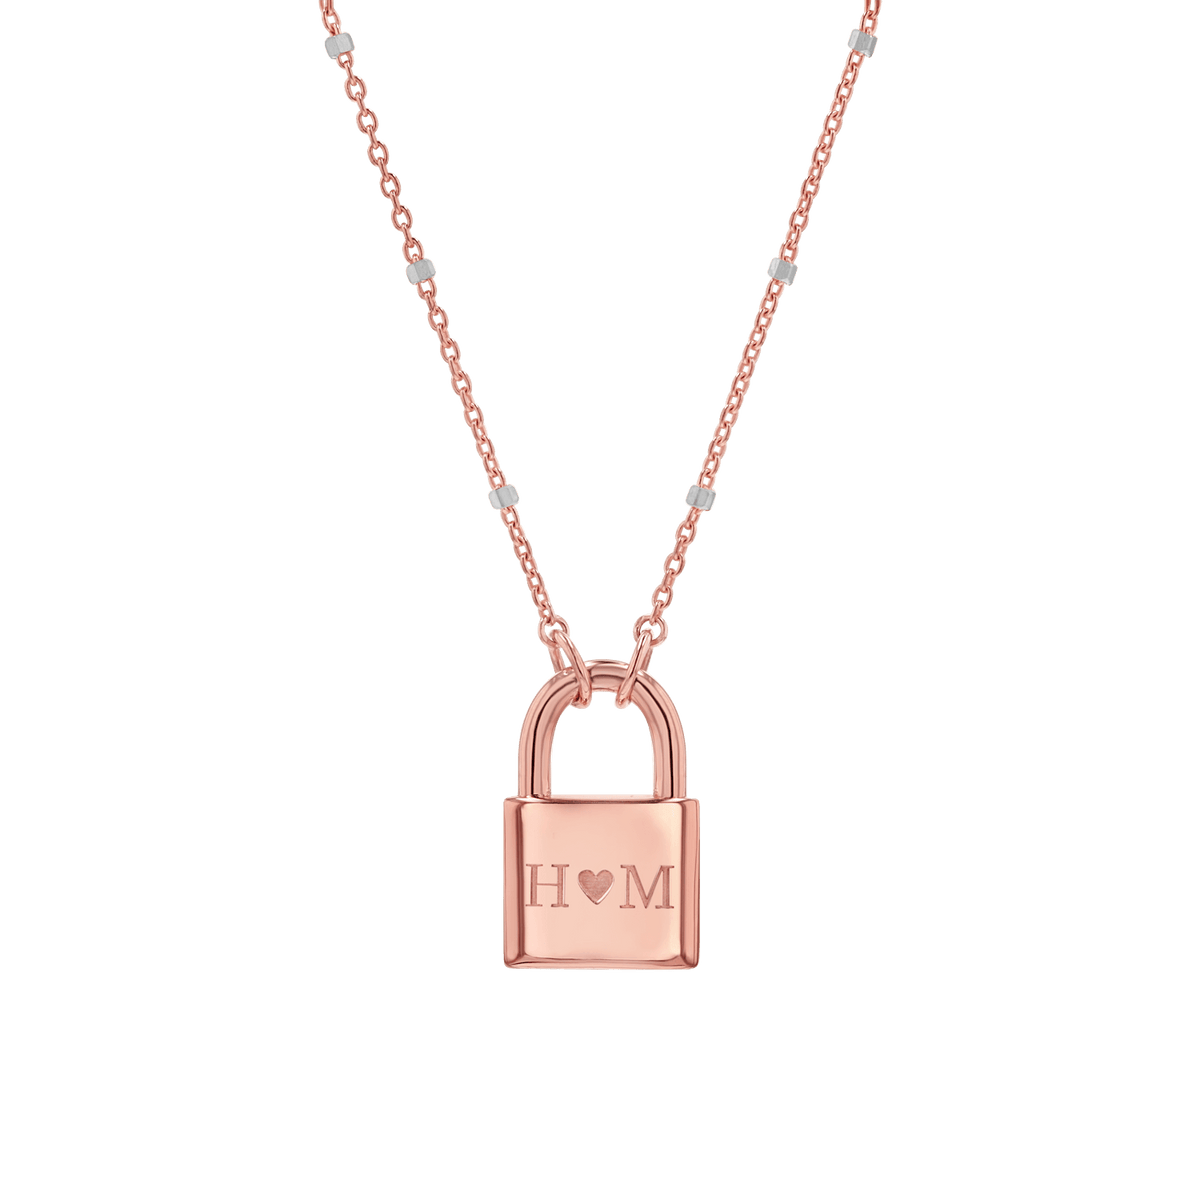 Apples of Gold Jewelry Engravable Padlock Necklace